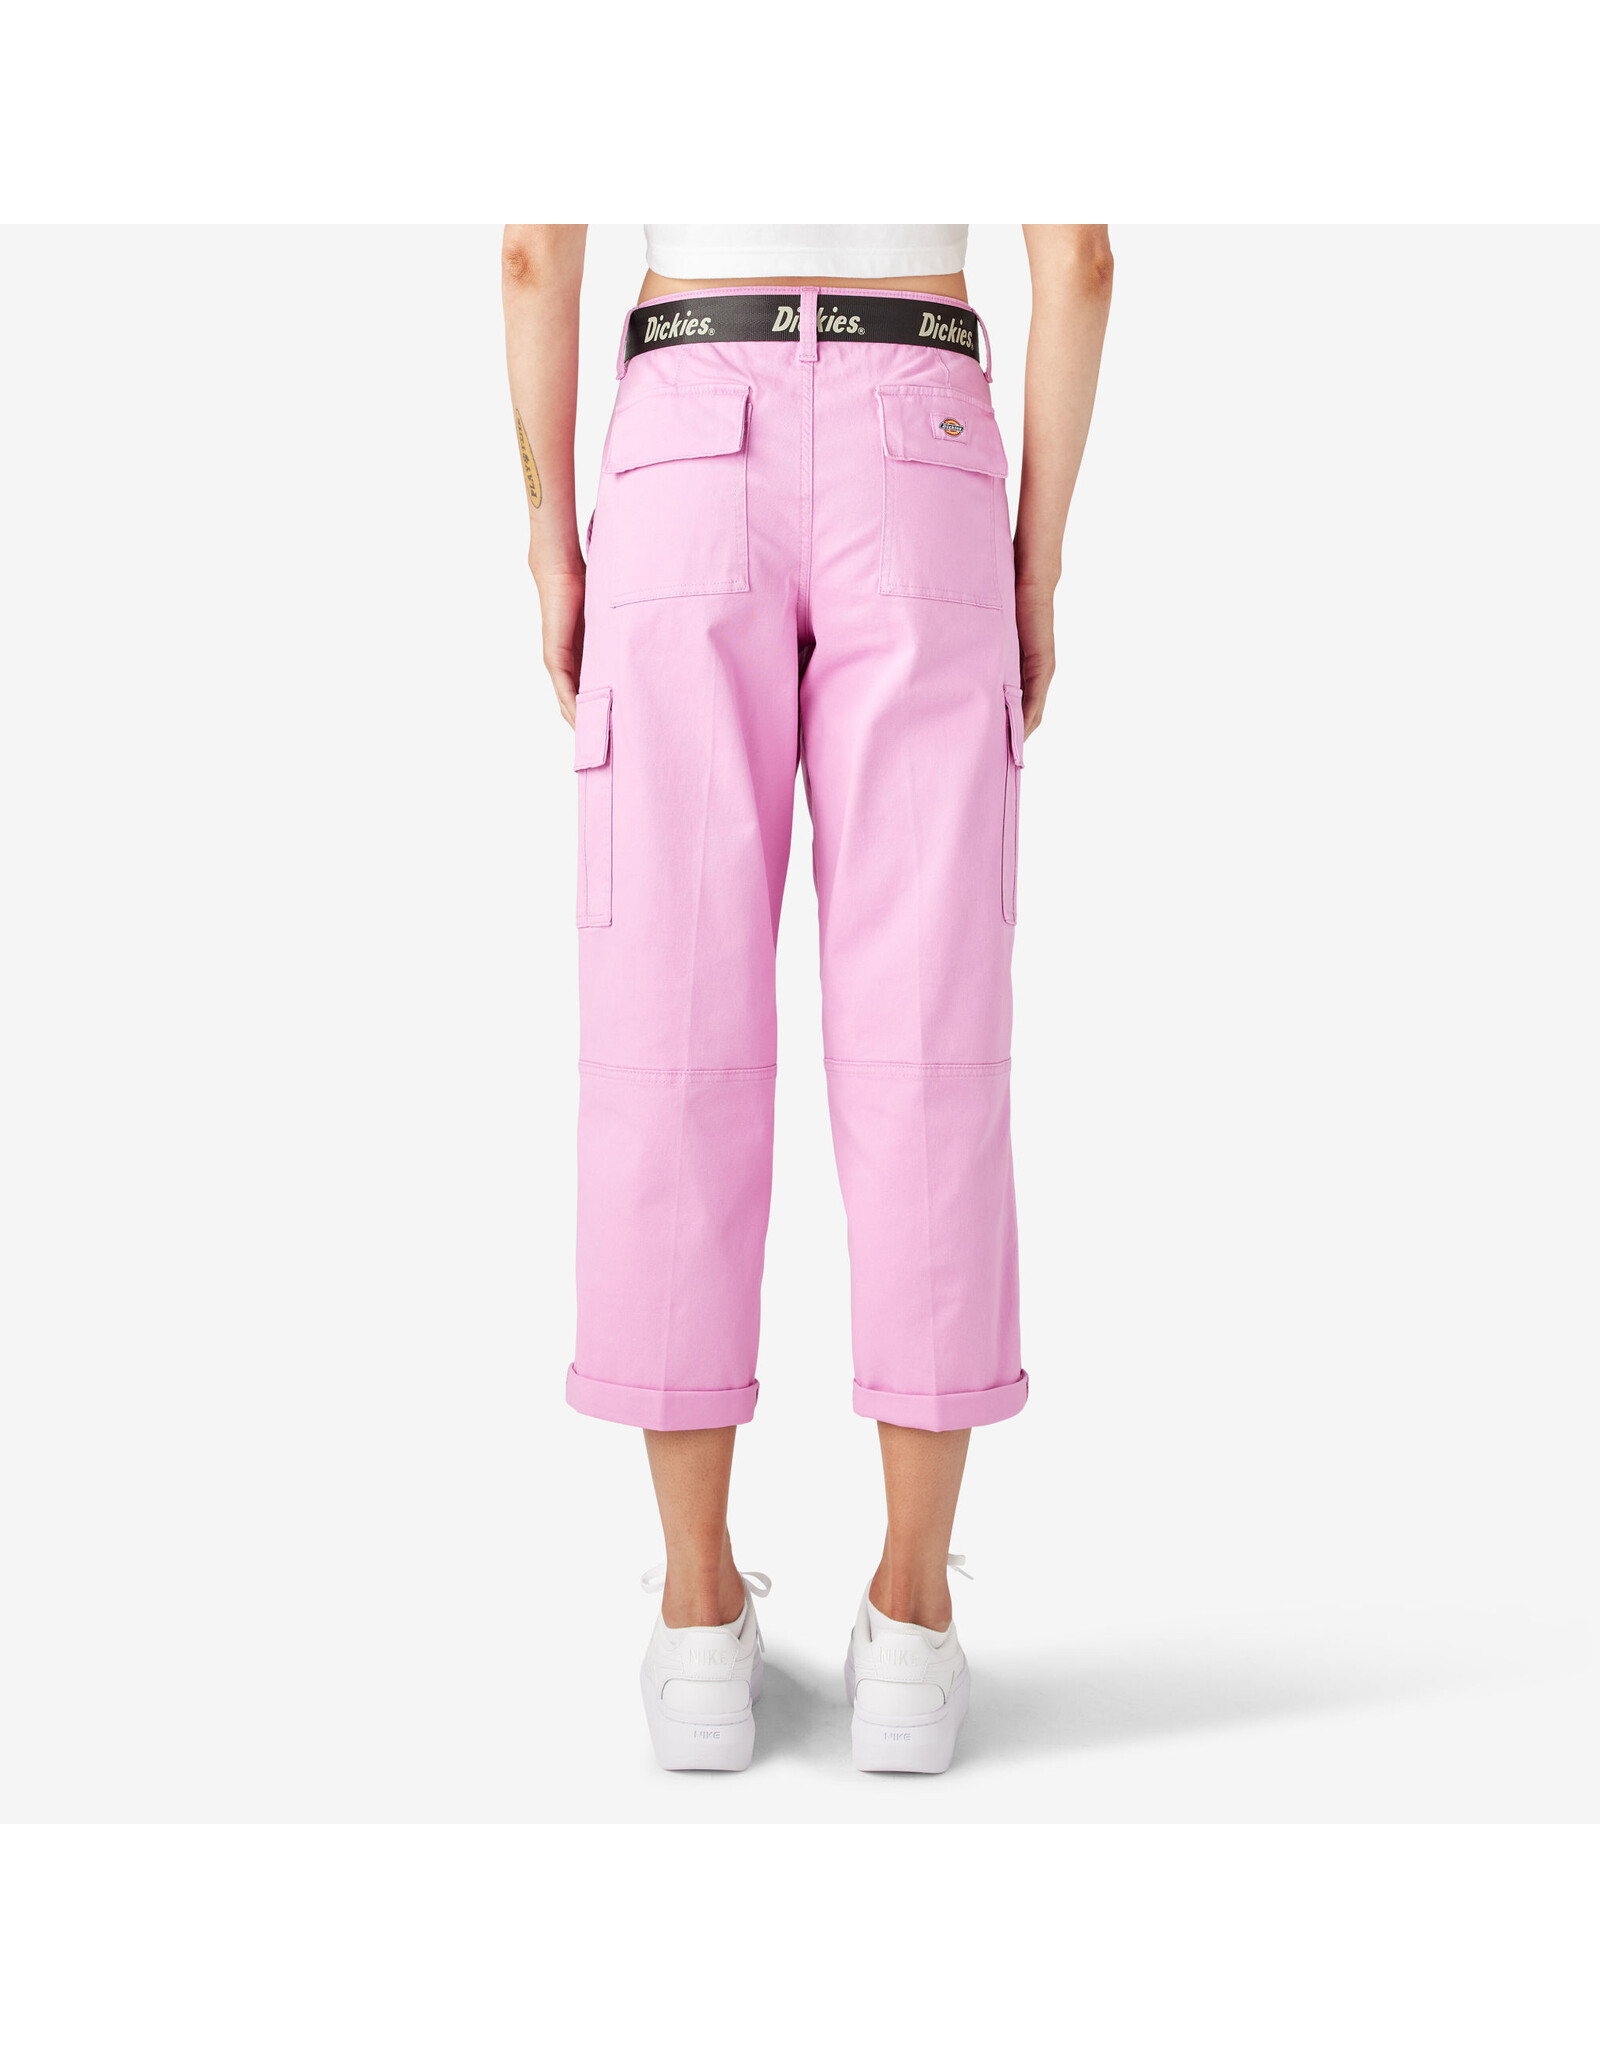 DICKIES Women's Relaxed Fit Cropped Cargo Pants Wild Rose - FPR50WR2